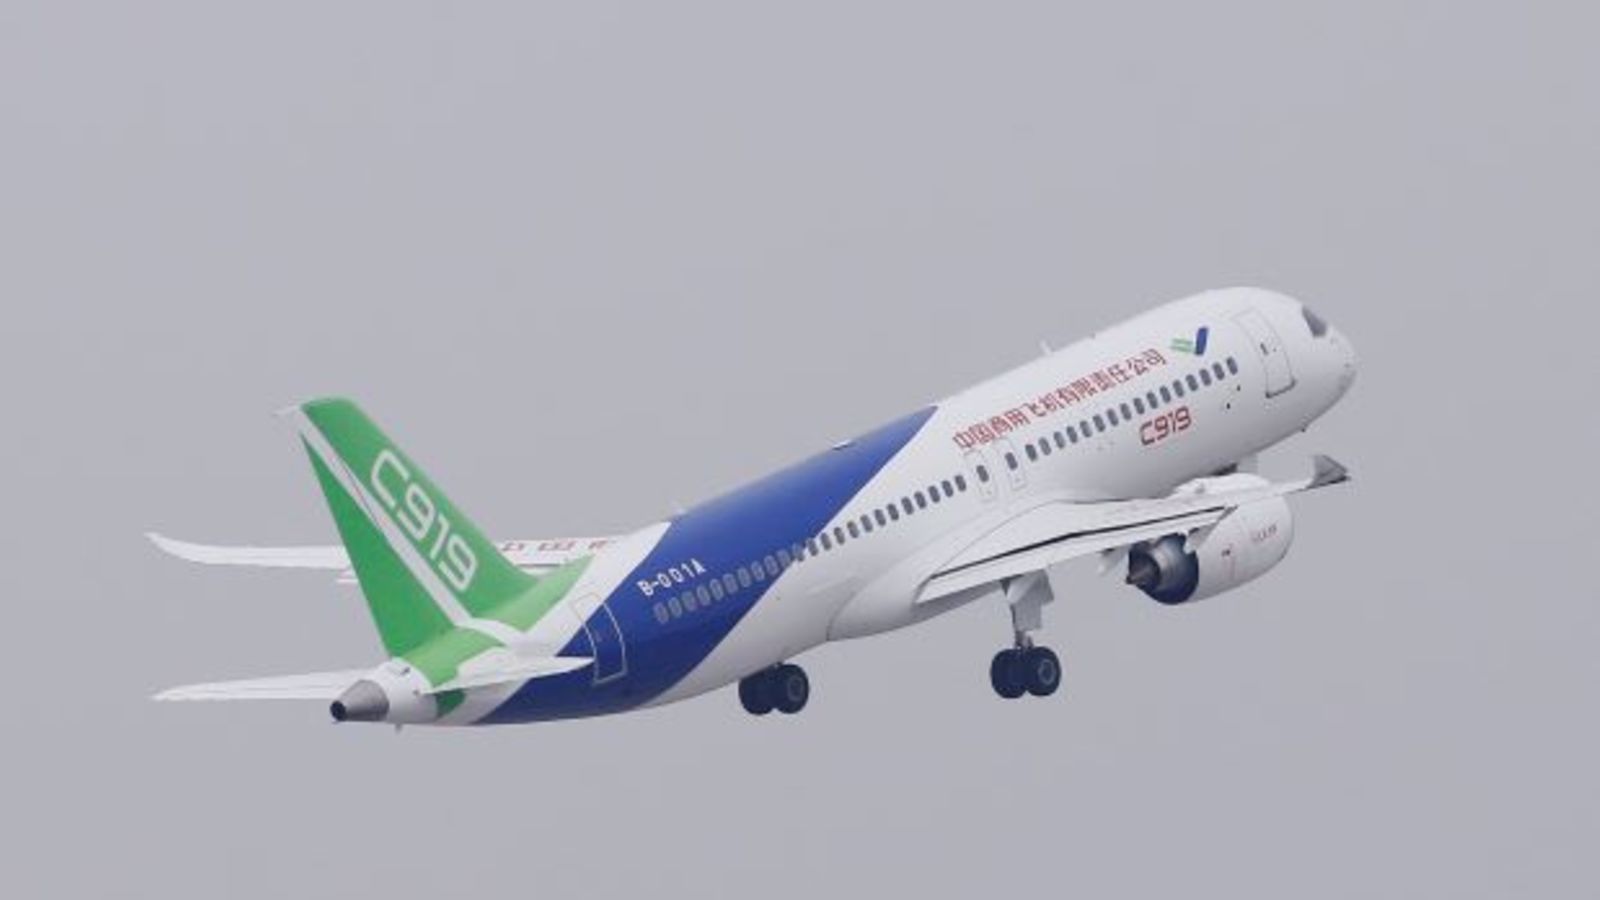 Illustration for article titled Comac built a third C919 prototype